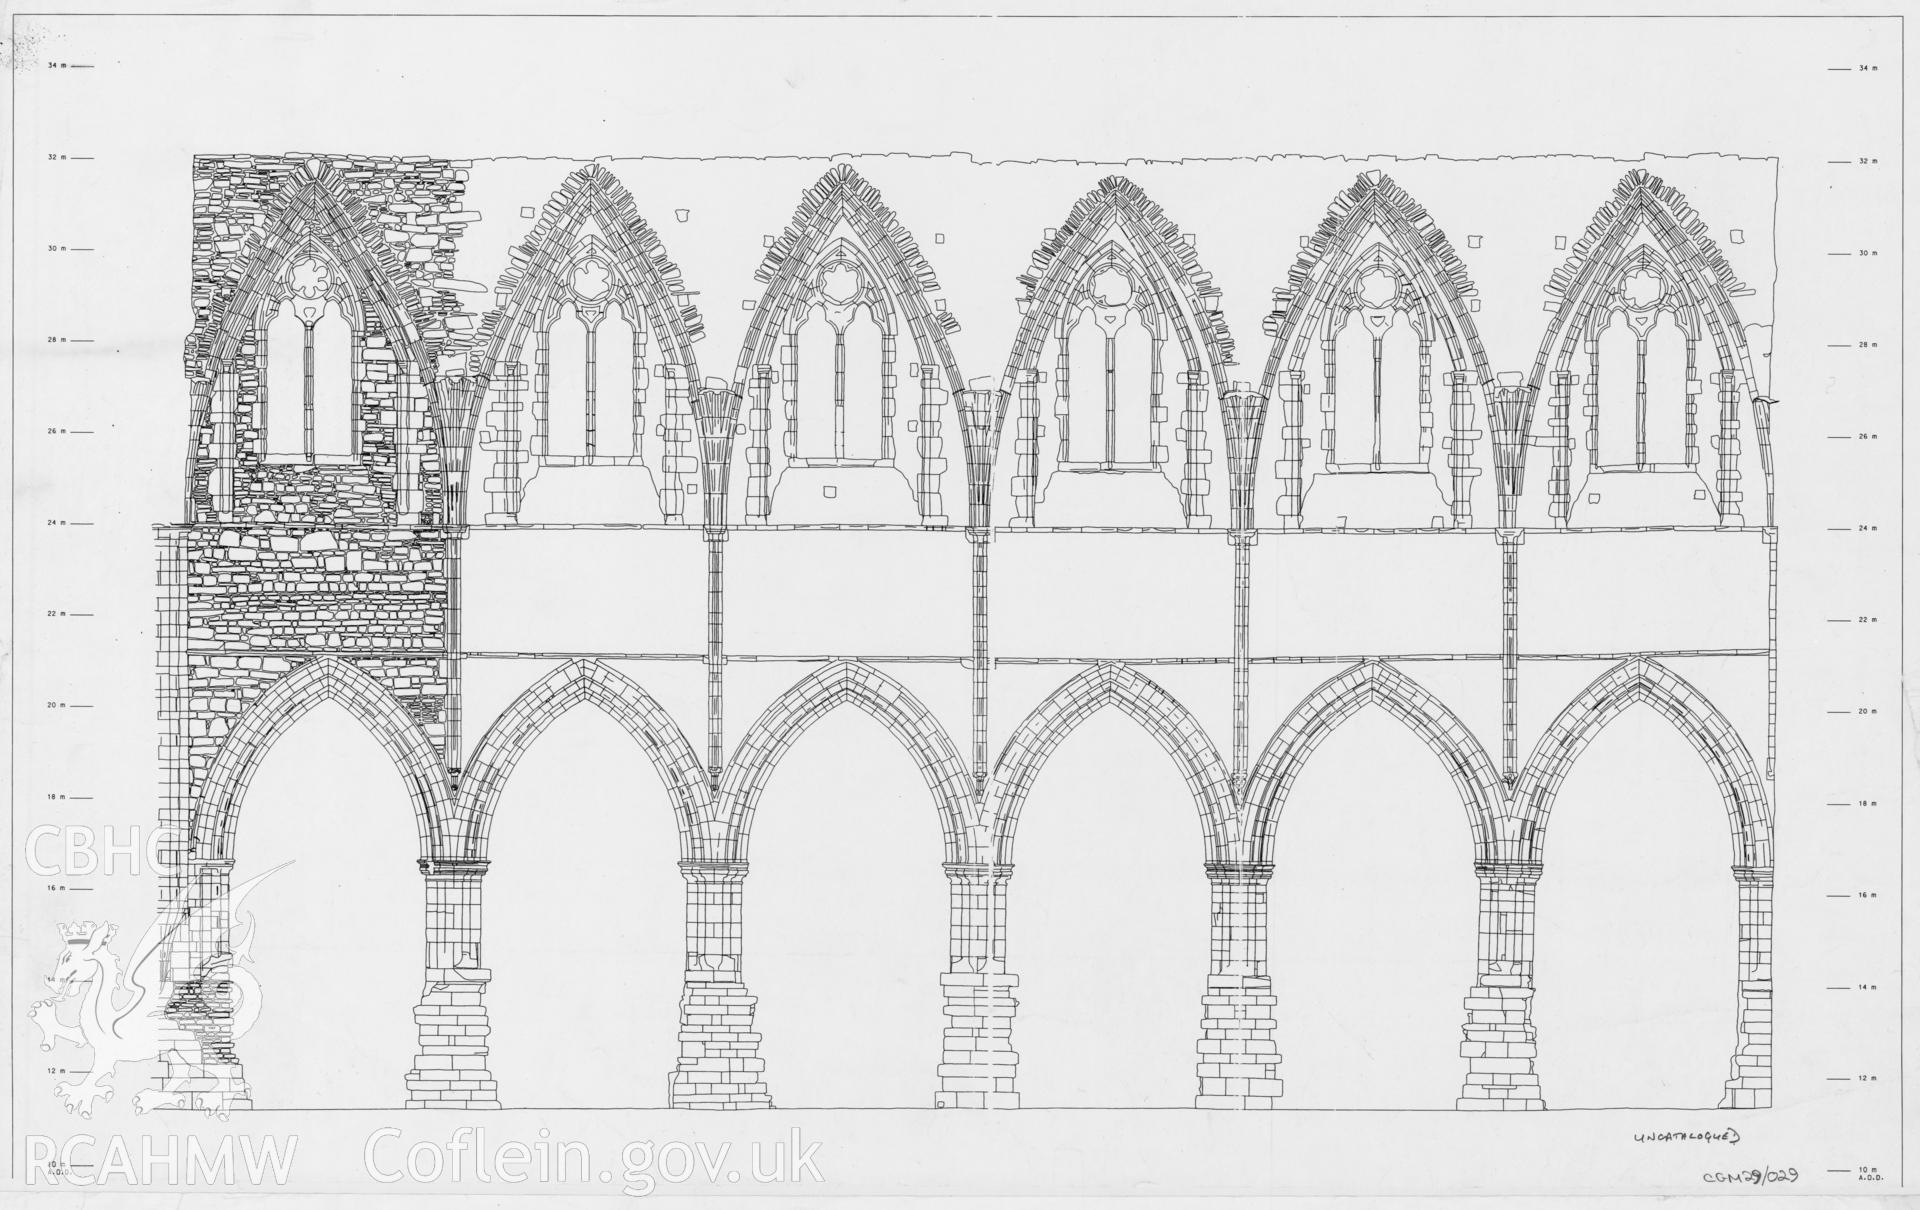 Digital copy of Cadw guardianship monument drawing of Tintern Abbey, elevation of part of the nave.